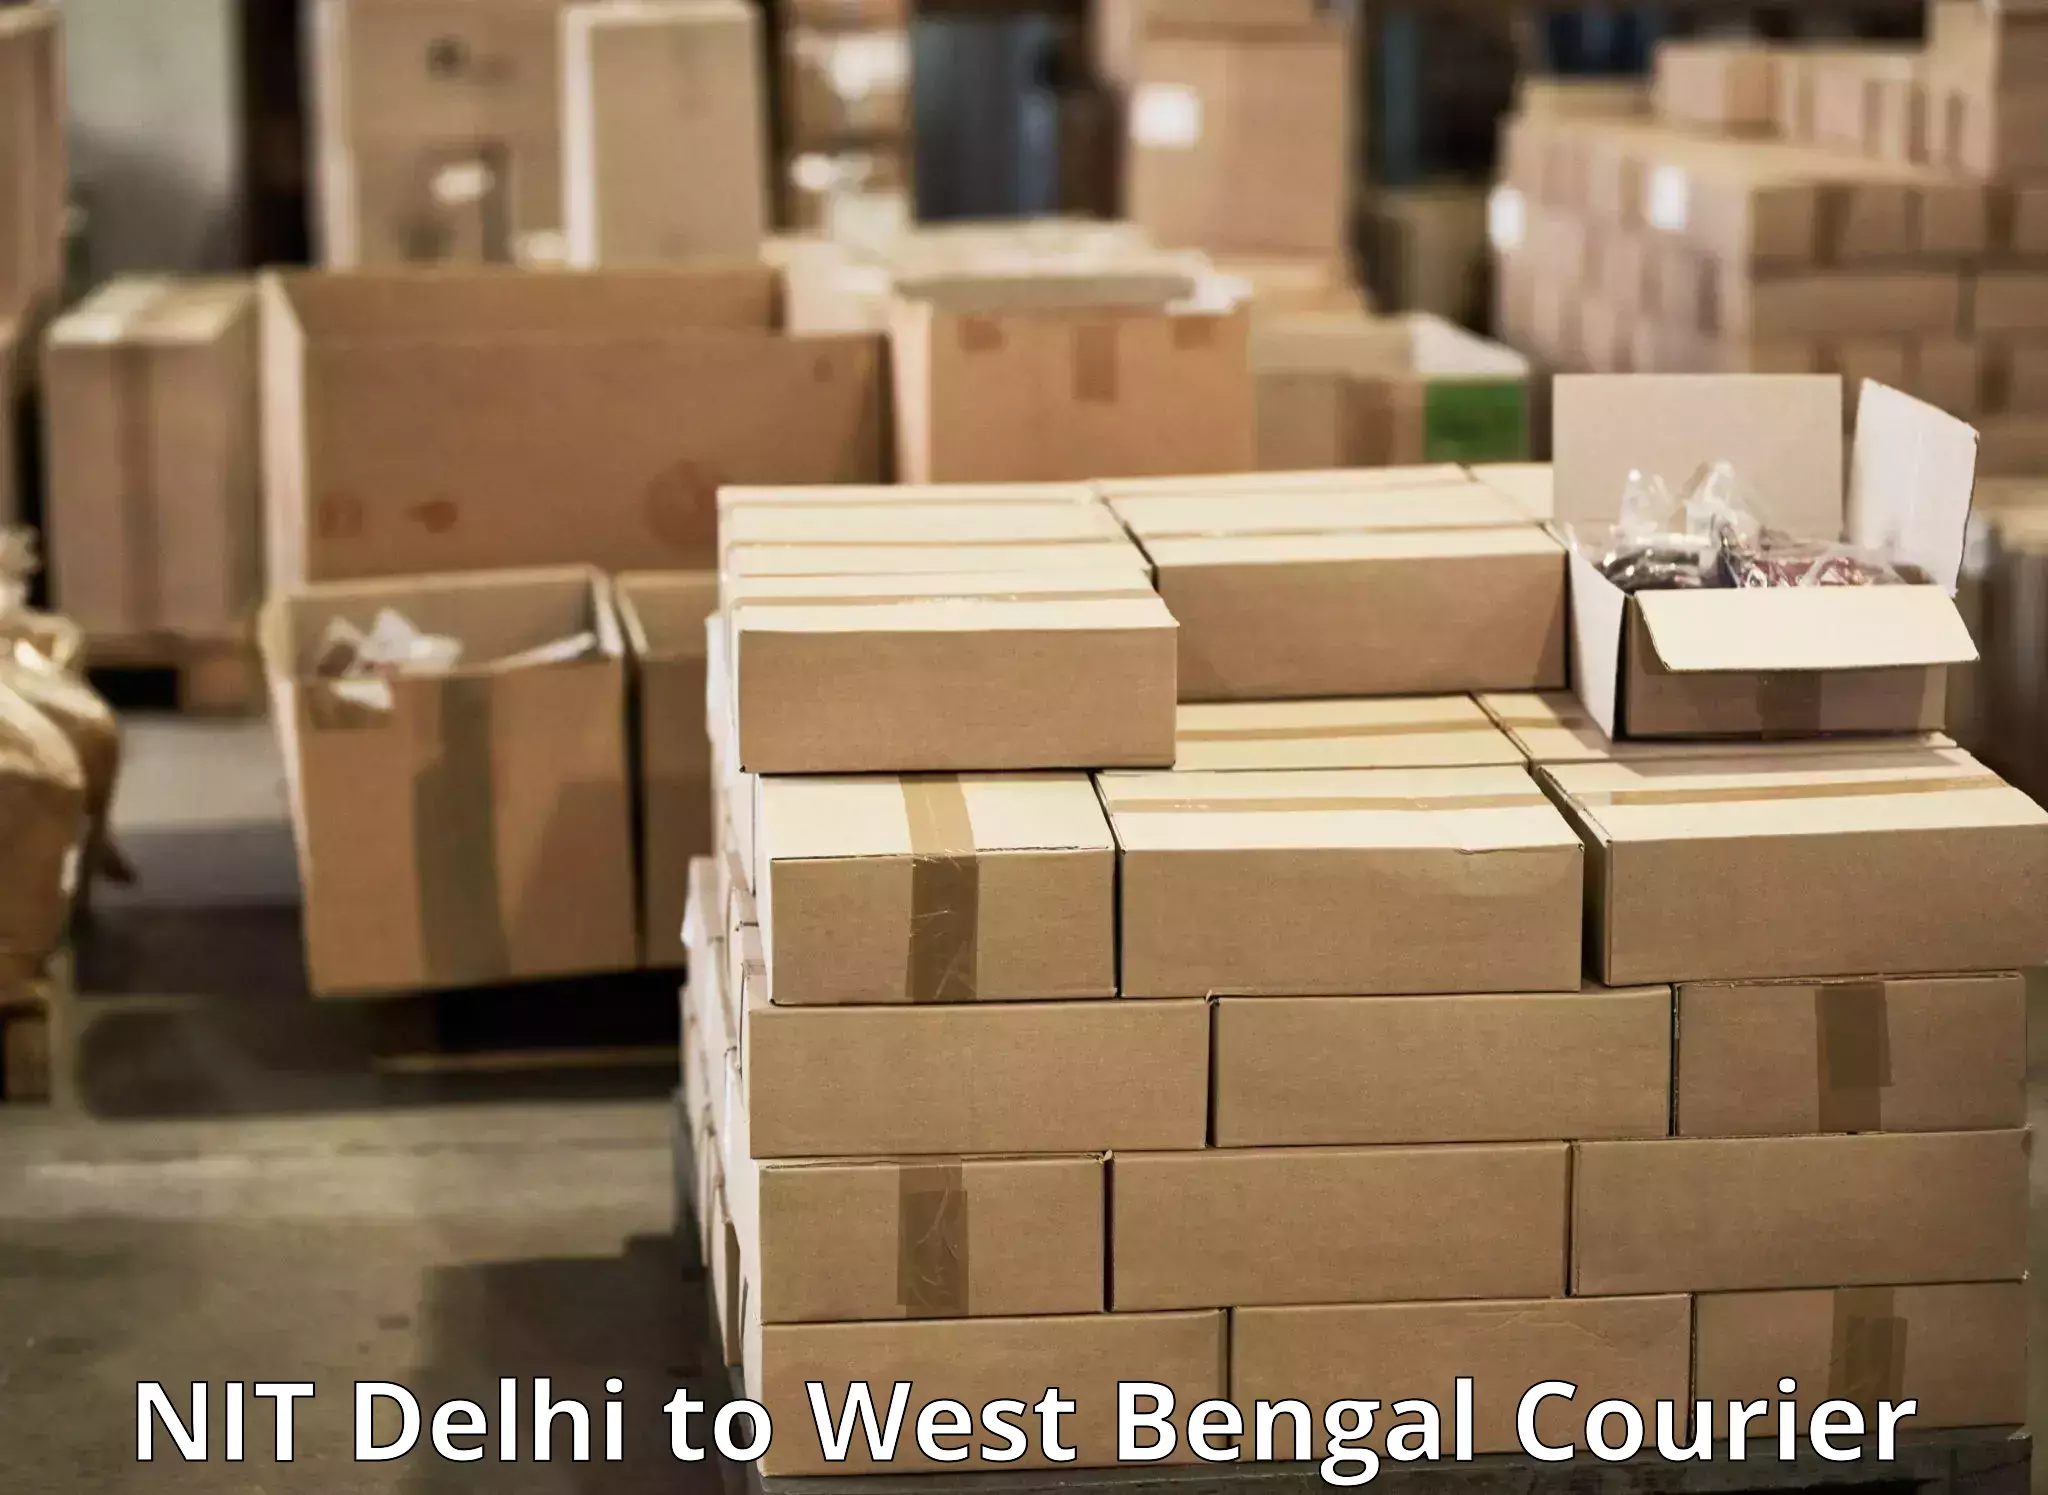 Express delivery solutions NIT Delhi to Titagarh